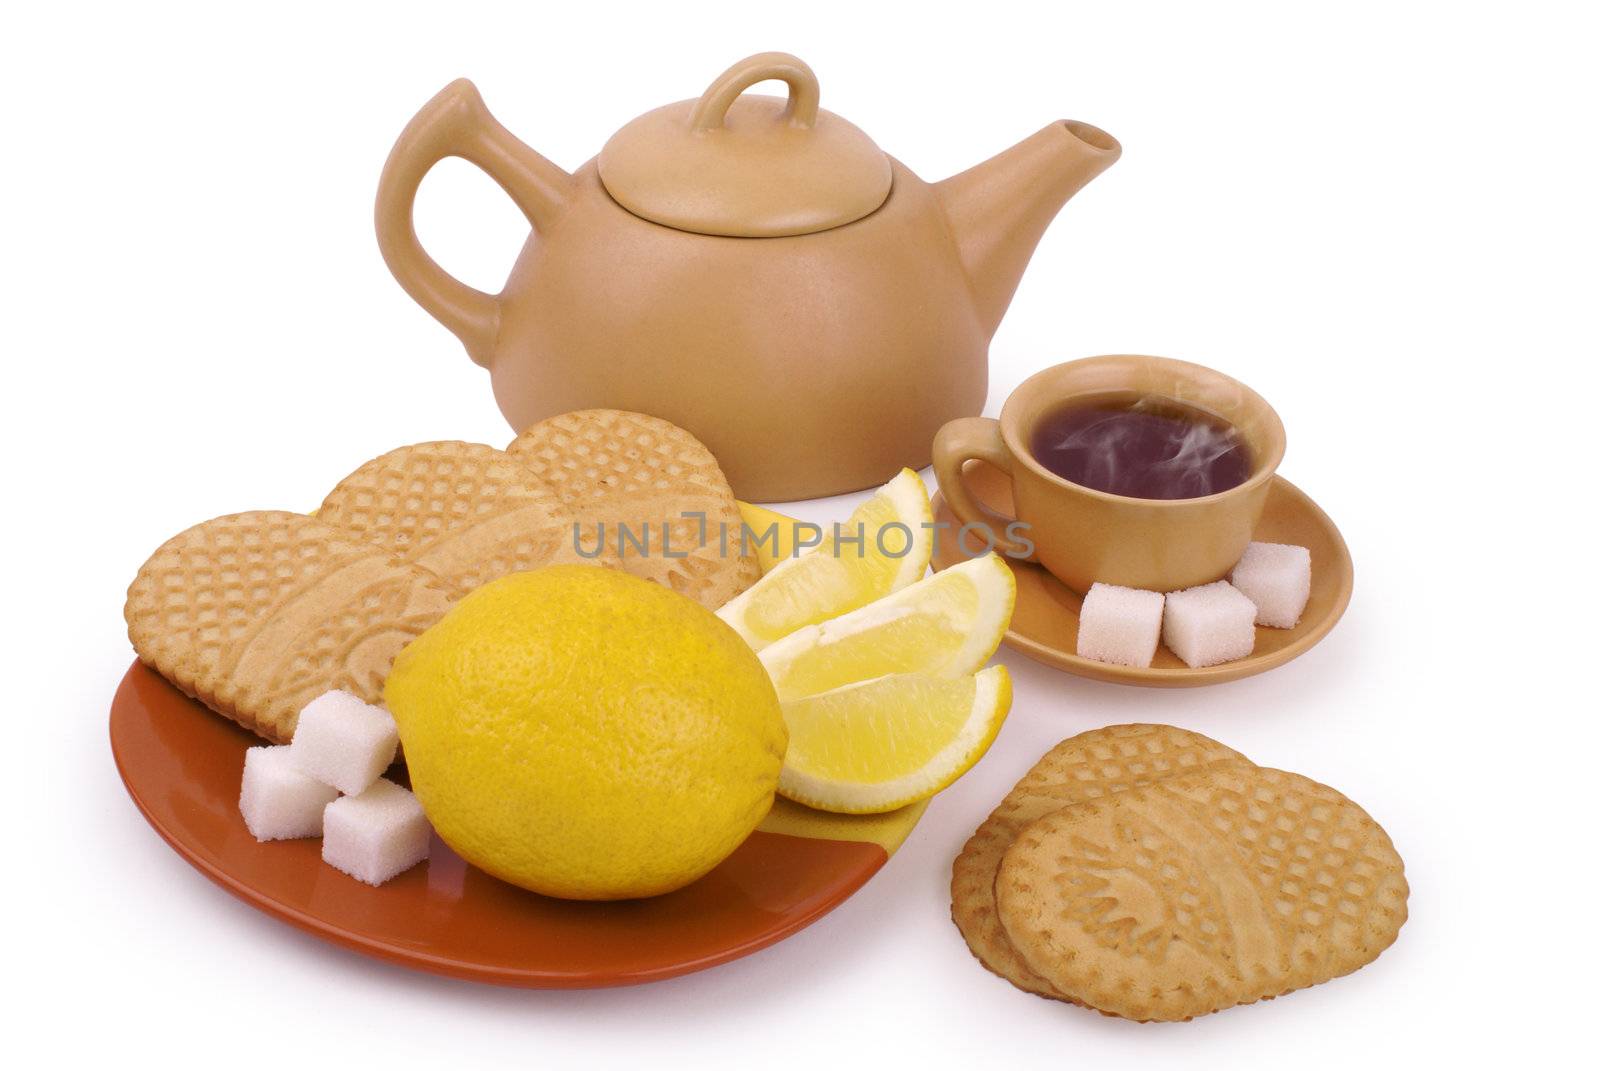 set of the earthenware teapot, cups of tea, lump shugar, sliced lemon and biscuits isolated on white background with clipping path               